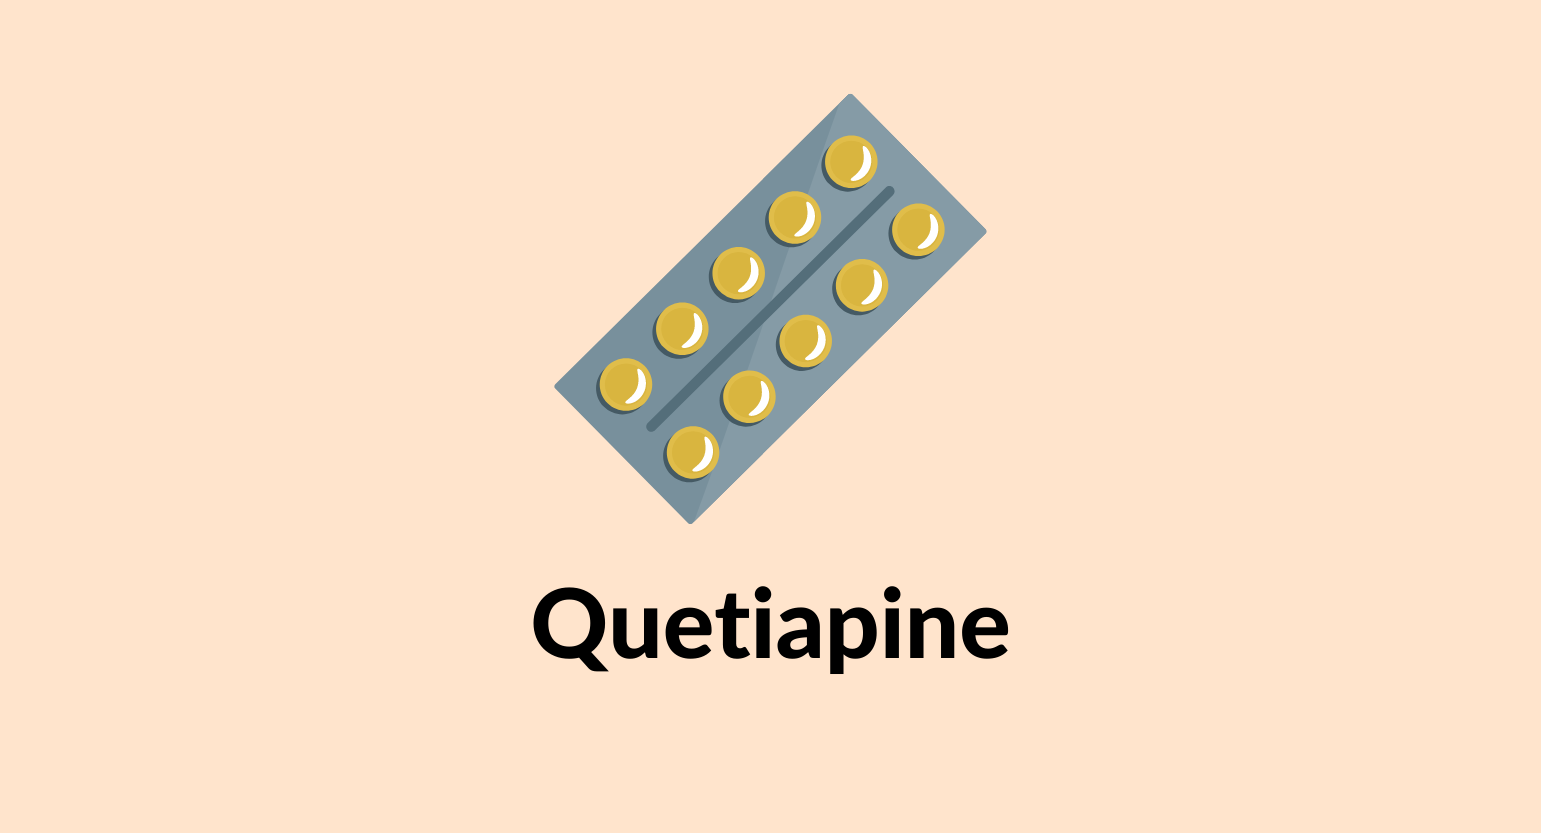 Illustration of quetiapine tablets.